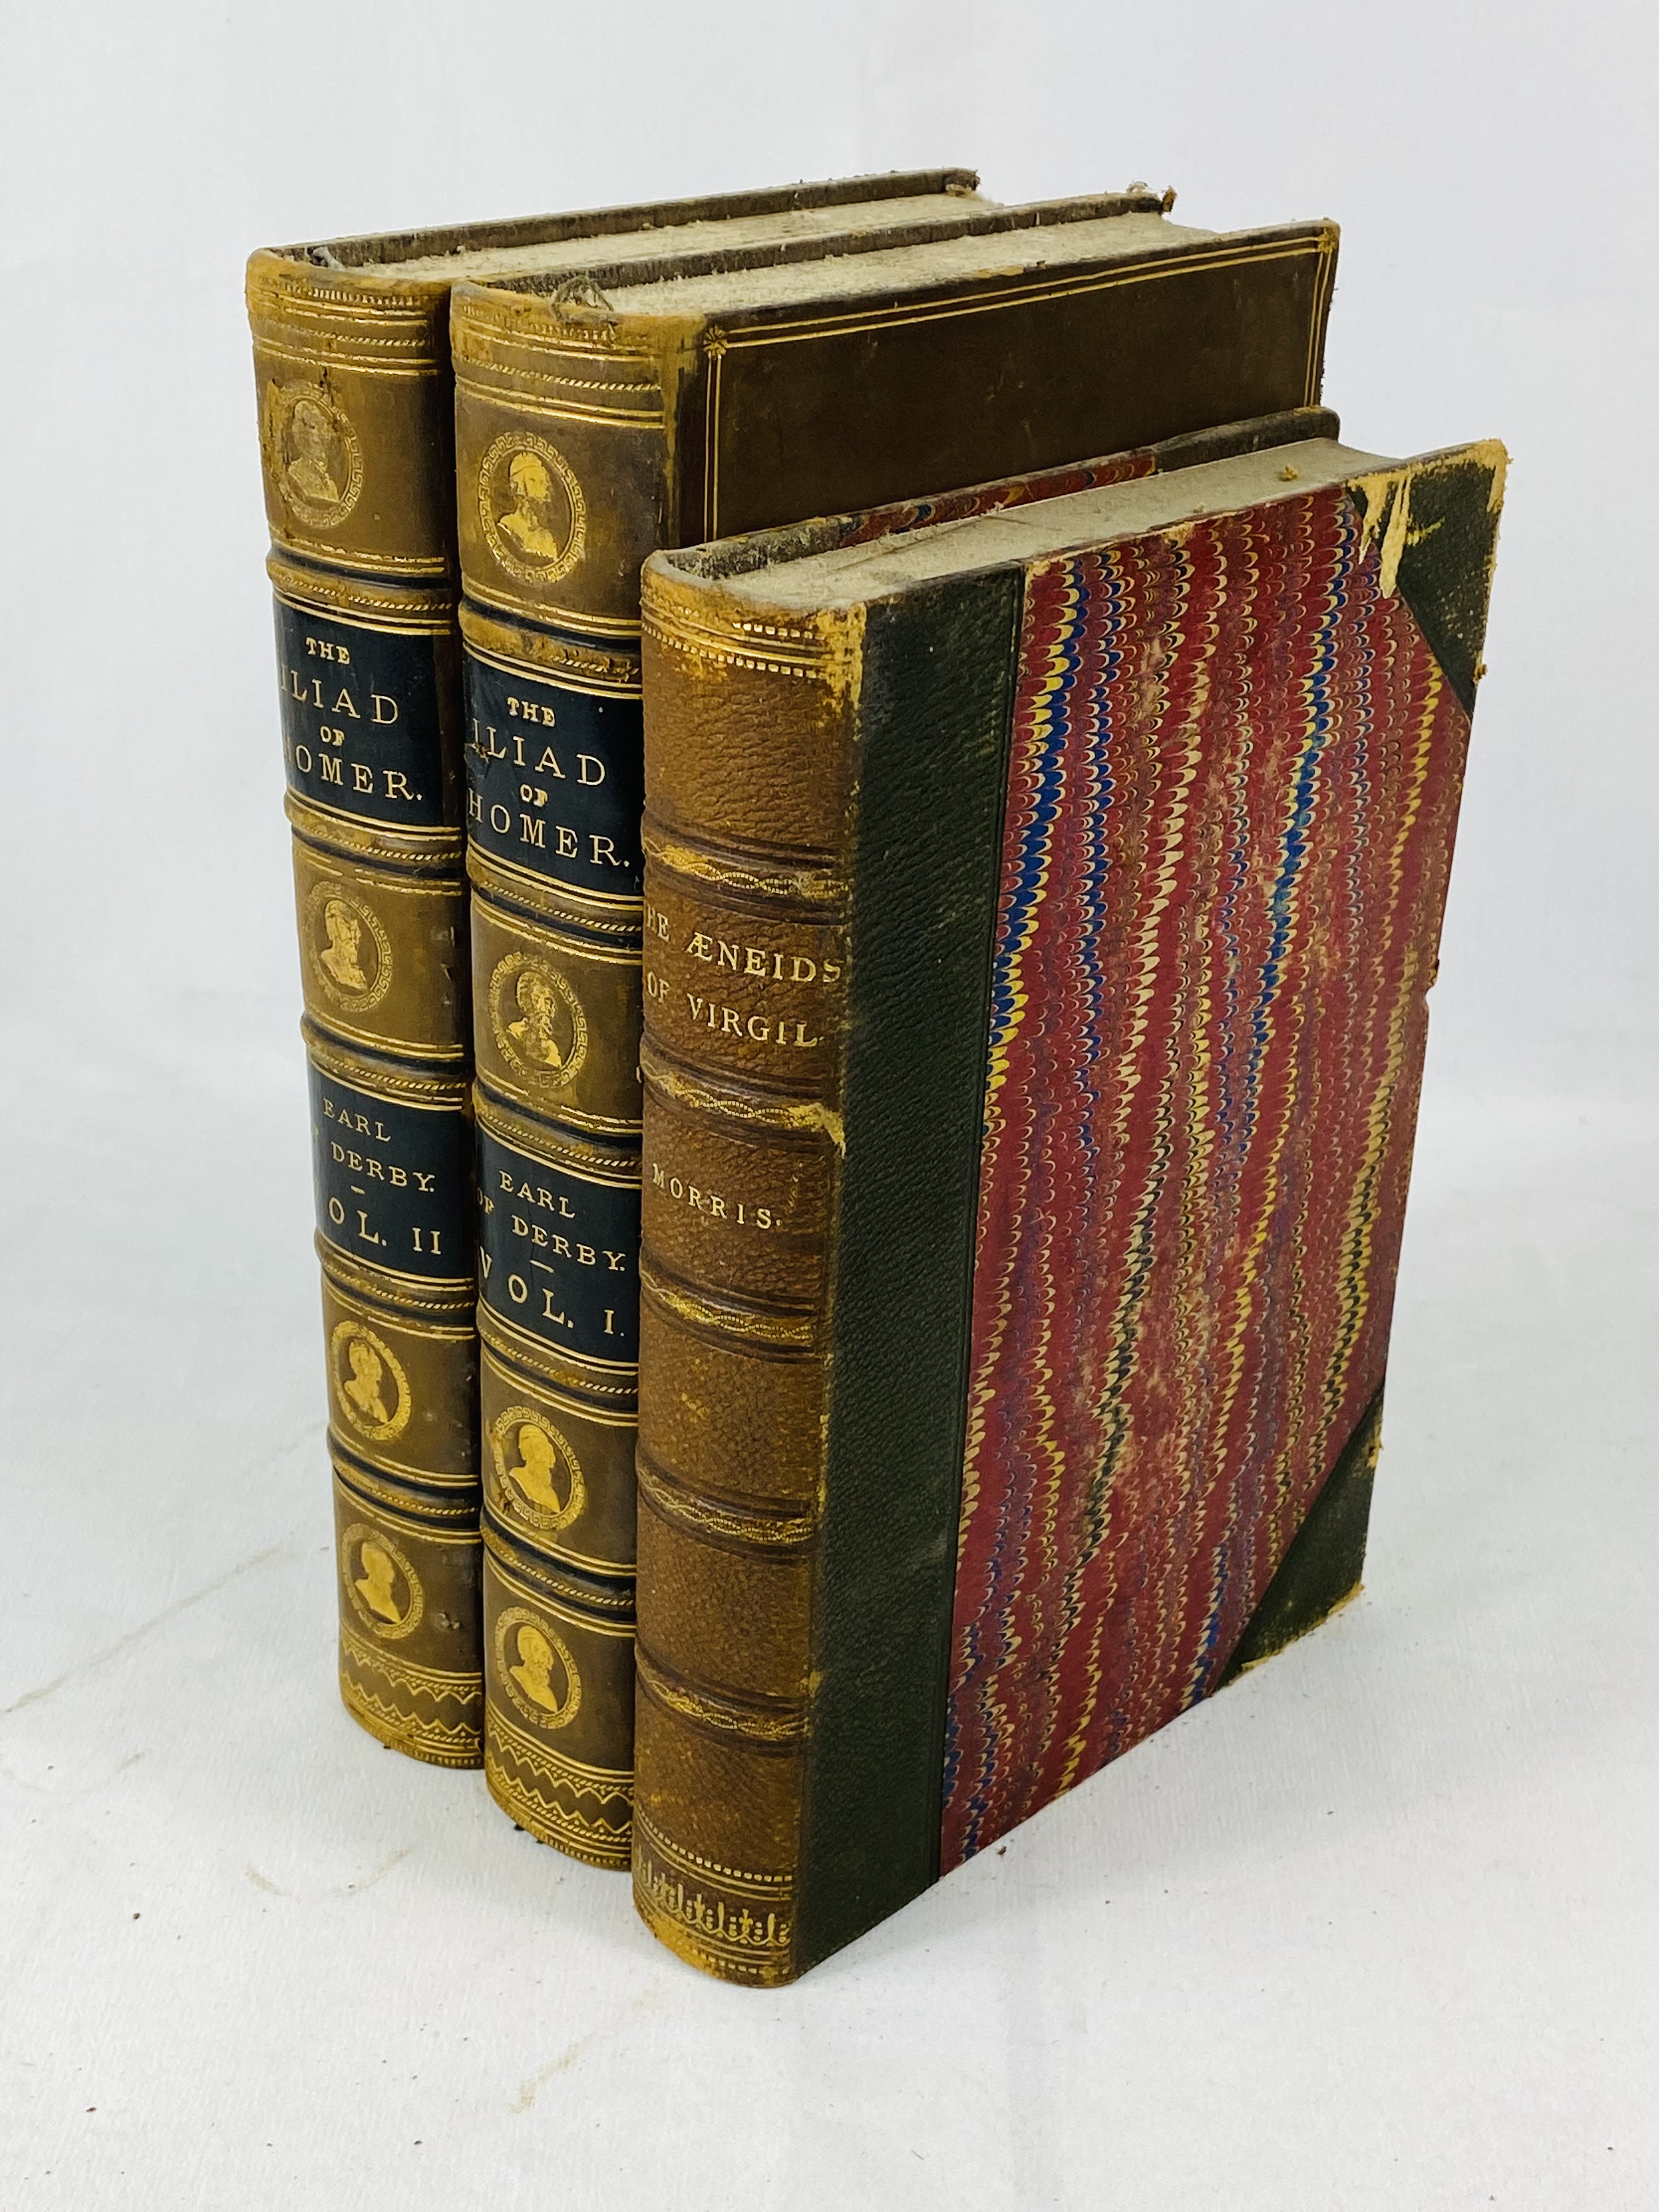 The Iliad of Homer by Edward Earl of Derby, 1865; together with the Aeneid of Virgil, 1876.